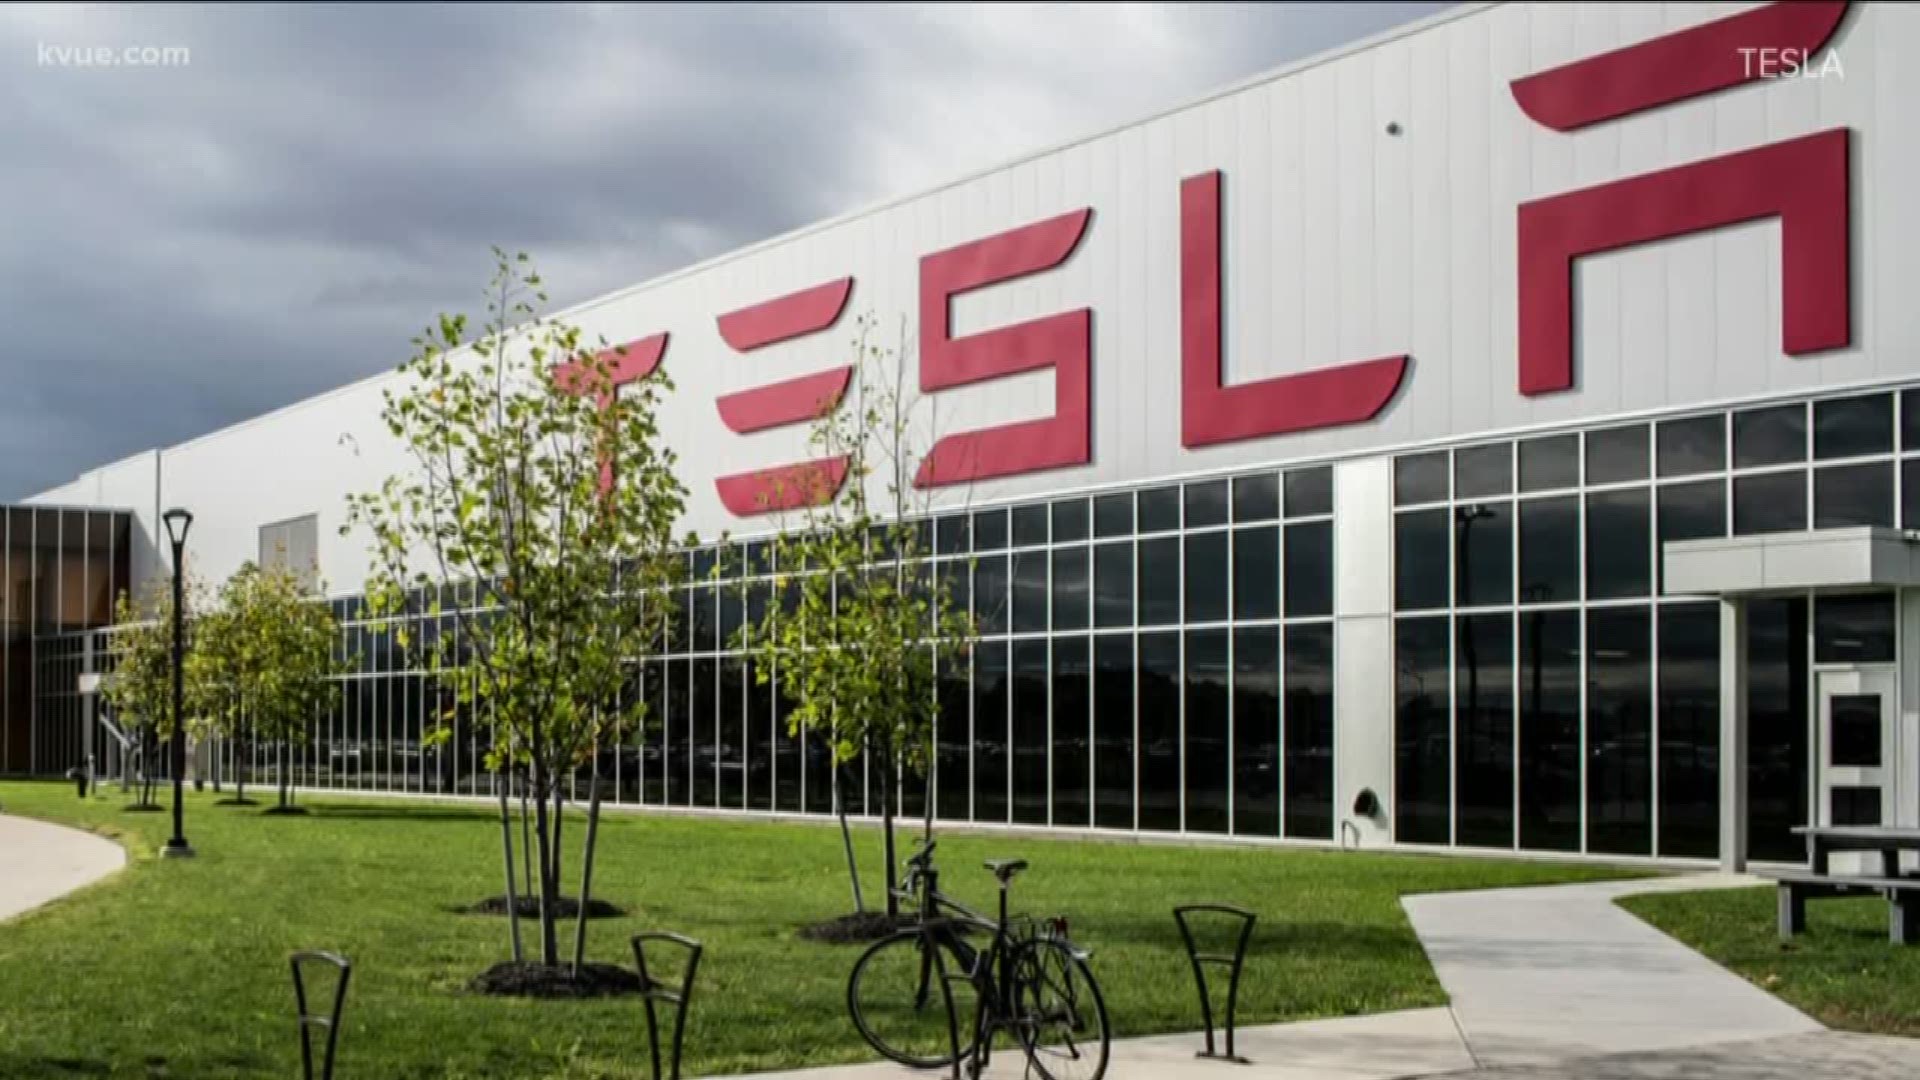 Tesla's Big Move to Kyle Sparks Excitement: What's Next for Electric Dreams in Texas?